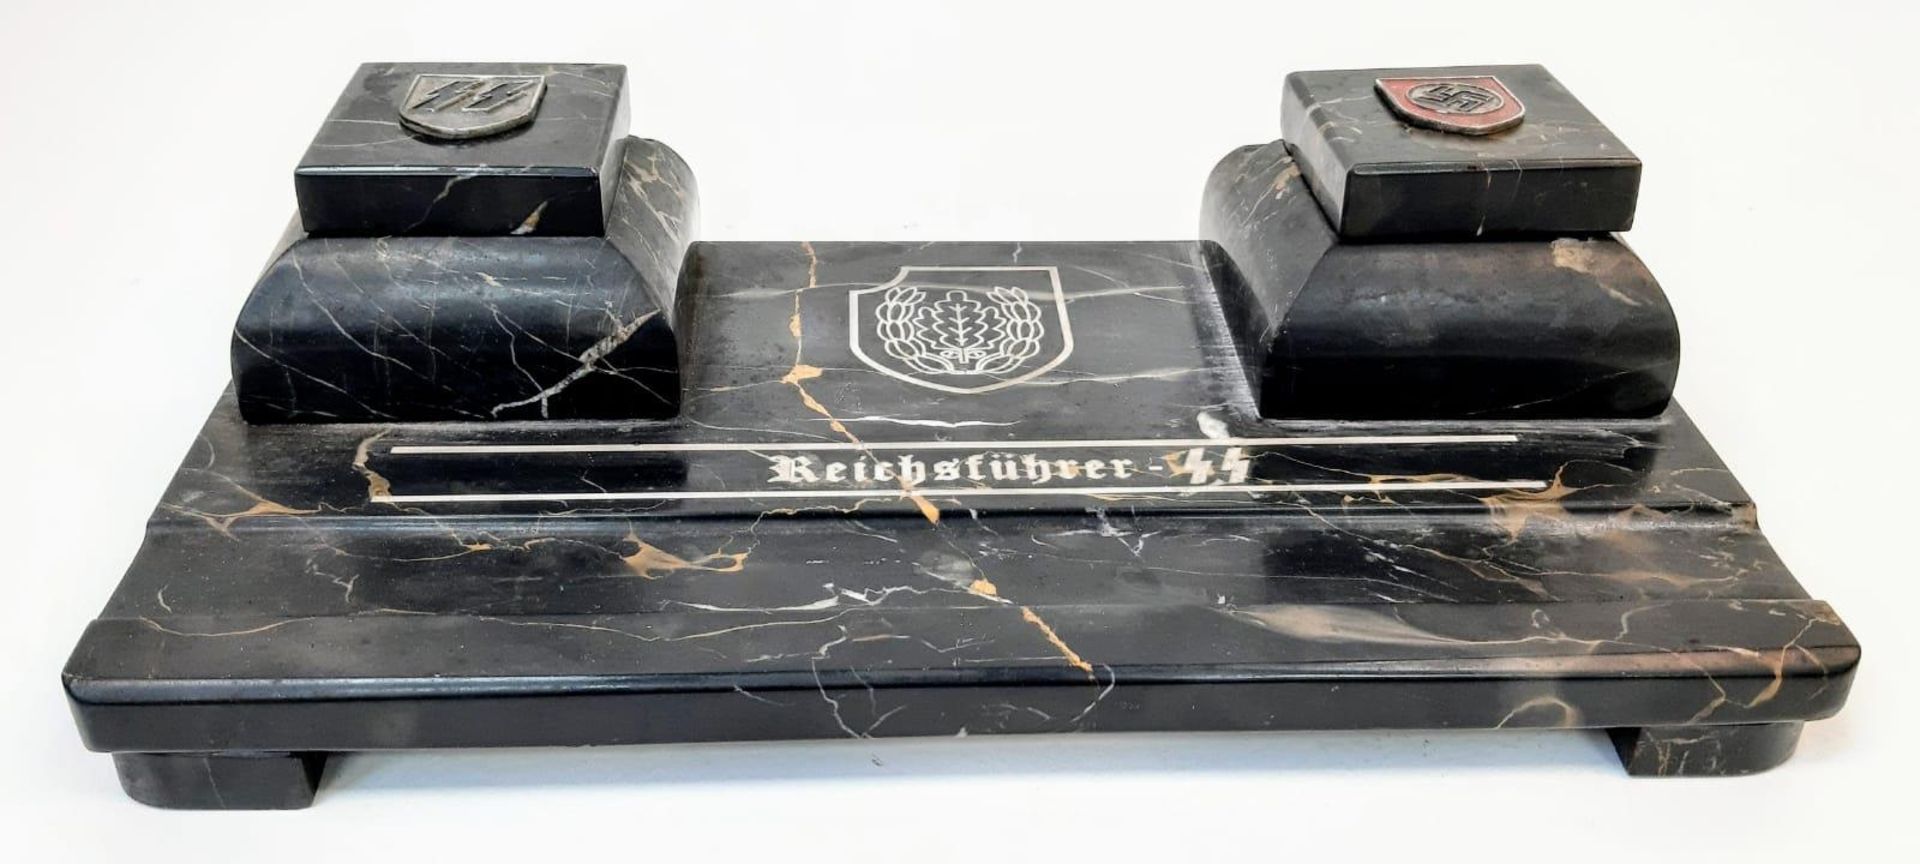 3rd Reich Ink Well Desk Set. With insignia of the 16th SS Panzergrenadier Division "Reichsführer-SS" - Image 2 of 6